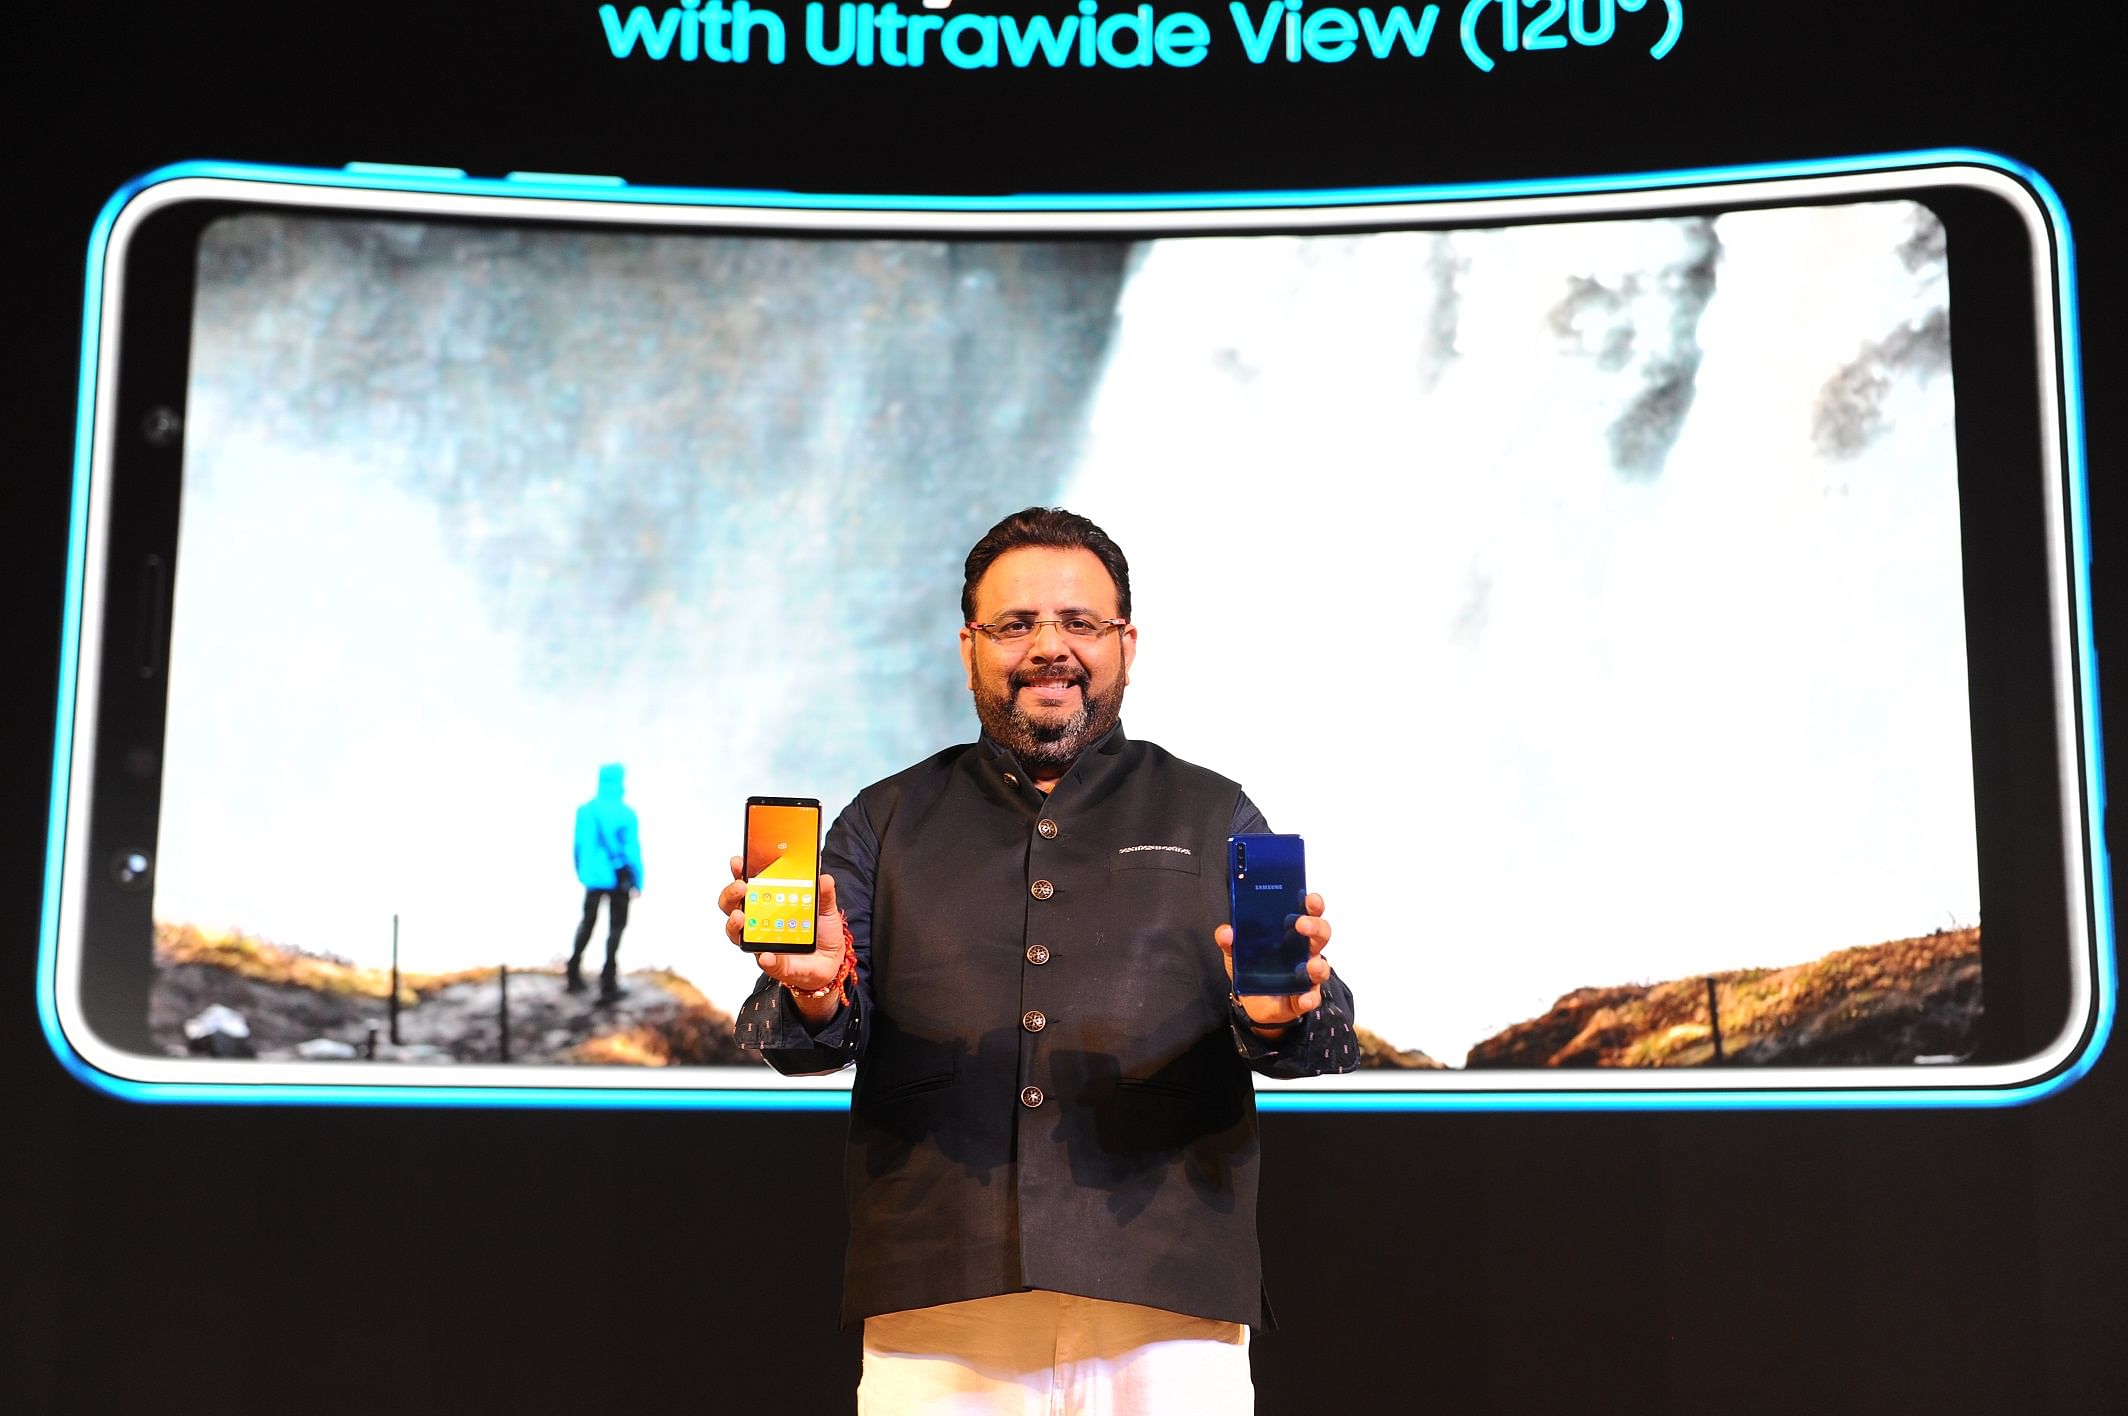 Aditya Babbar, General Manager, Mobile Business, Samsung India at the launch of Galaxy A7 in Bengaluru.